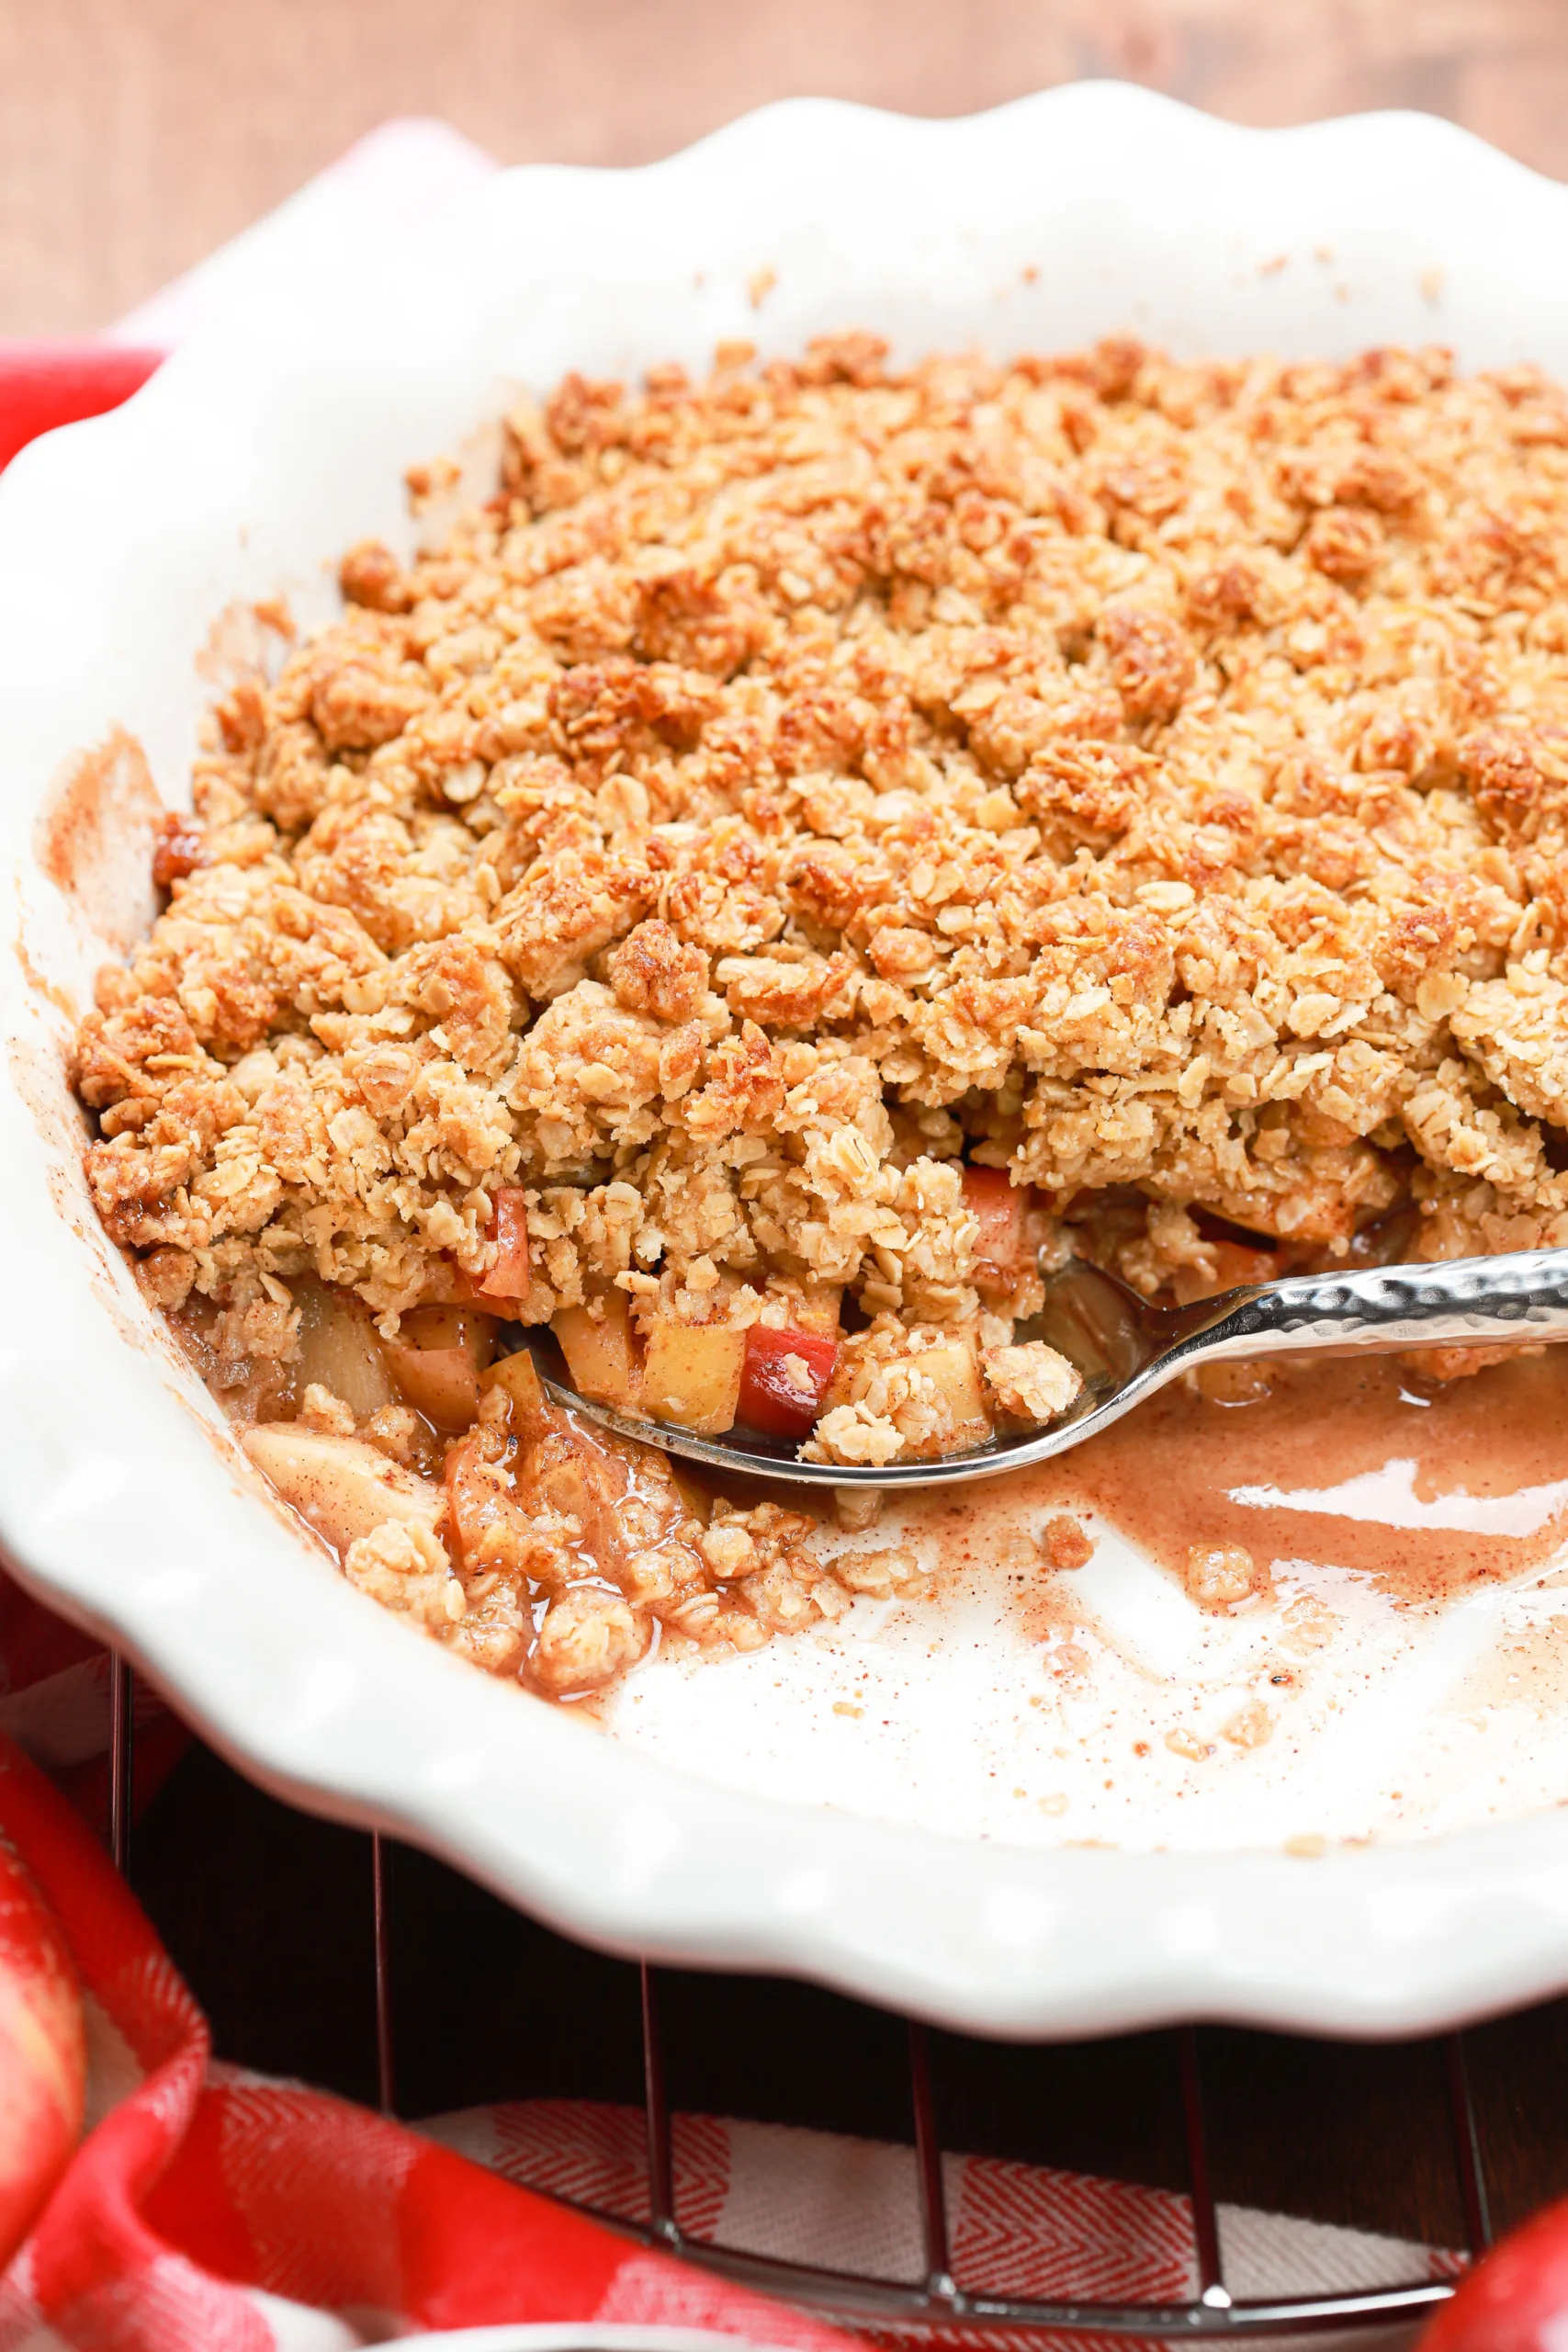 Side view of a scoop of caramel apple crisp in a pie plate surrounded by a red checked cloth.